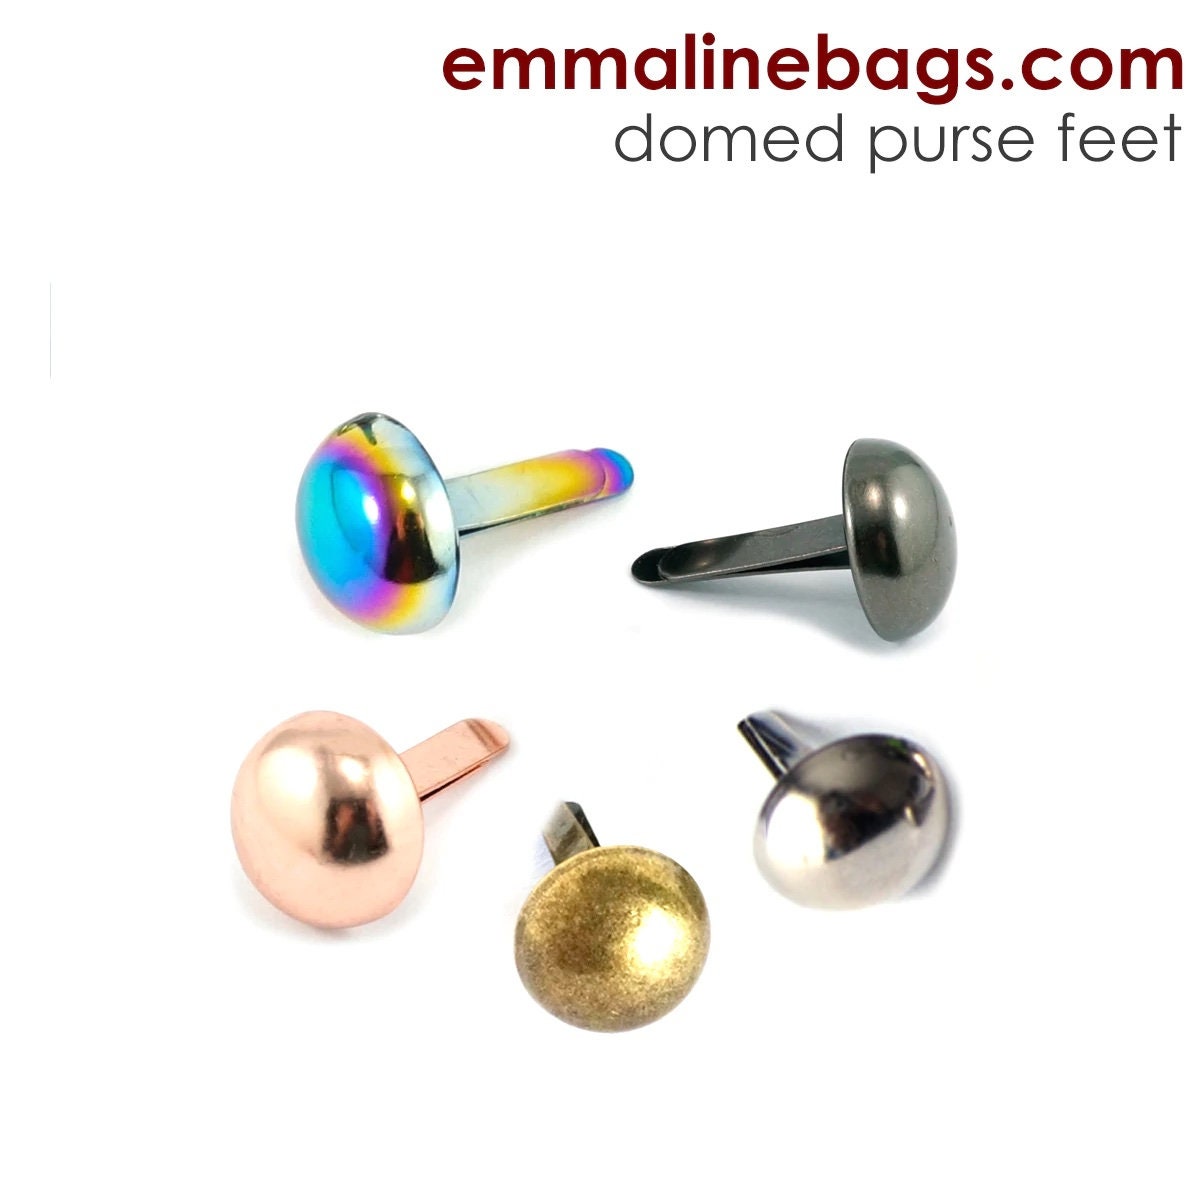 1/2" Domed Purse Feet 6 Pack